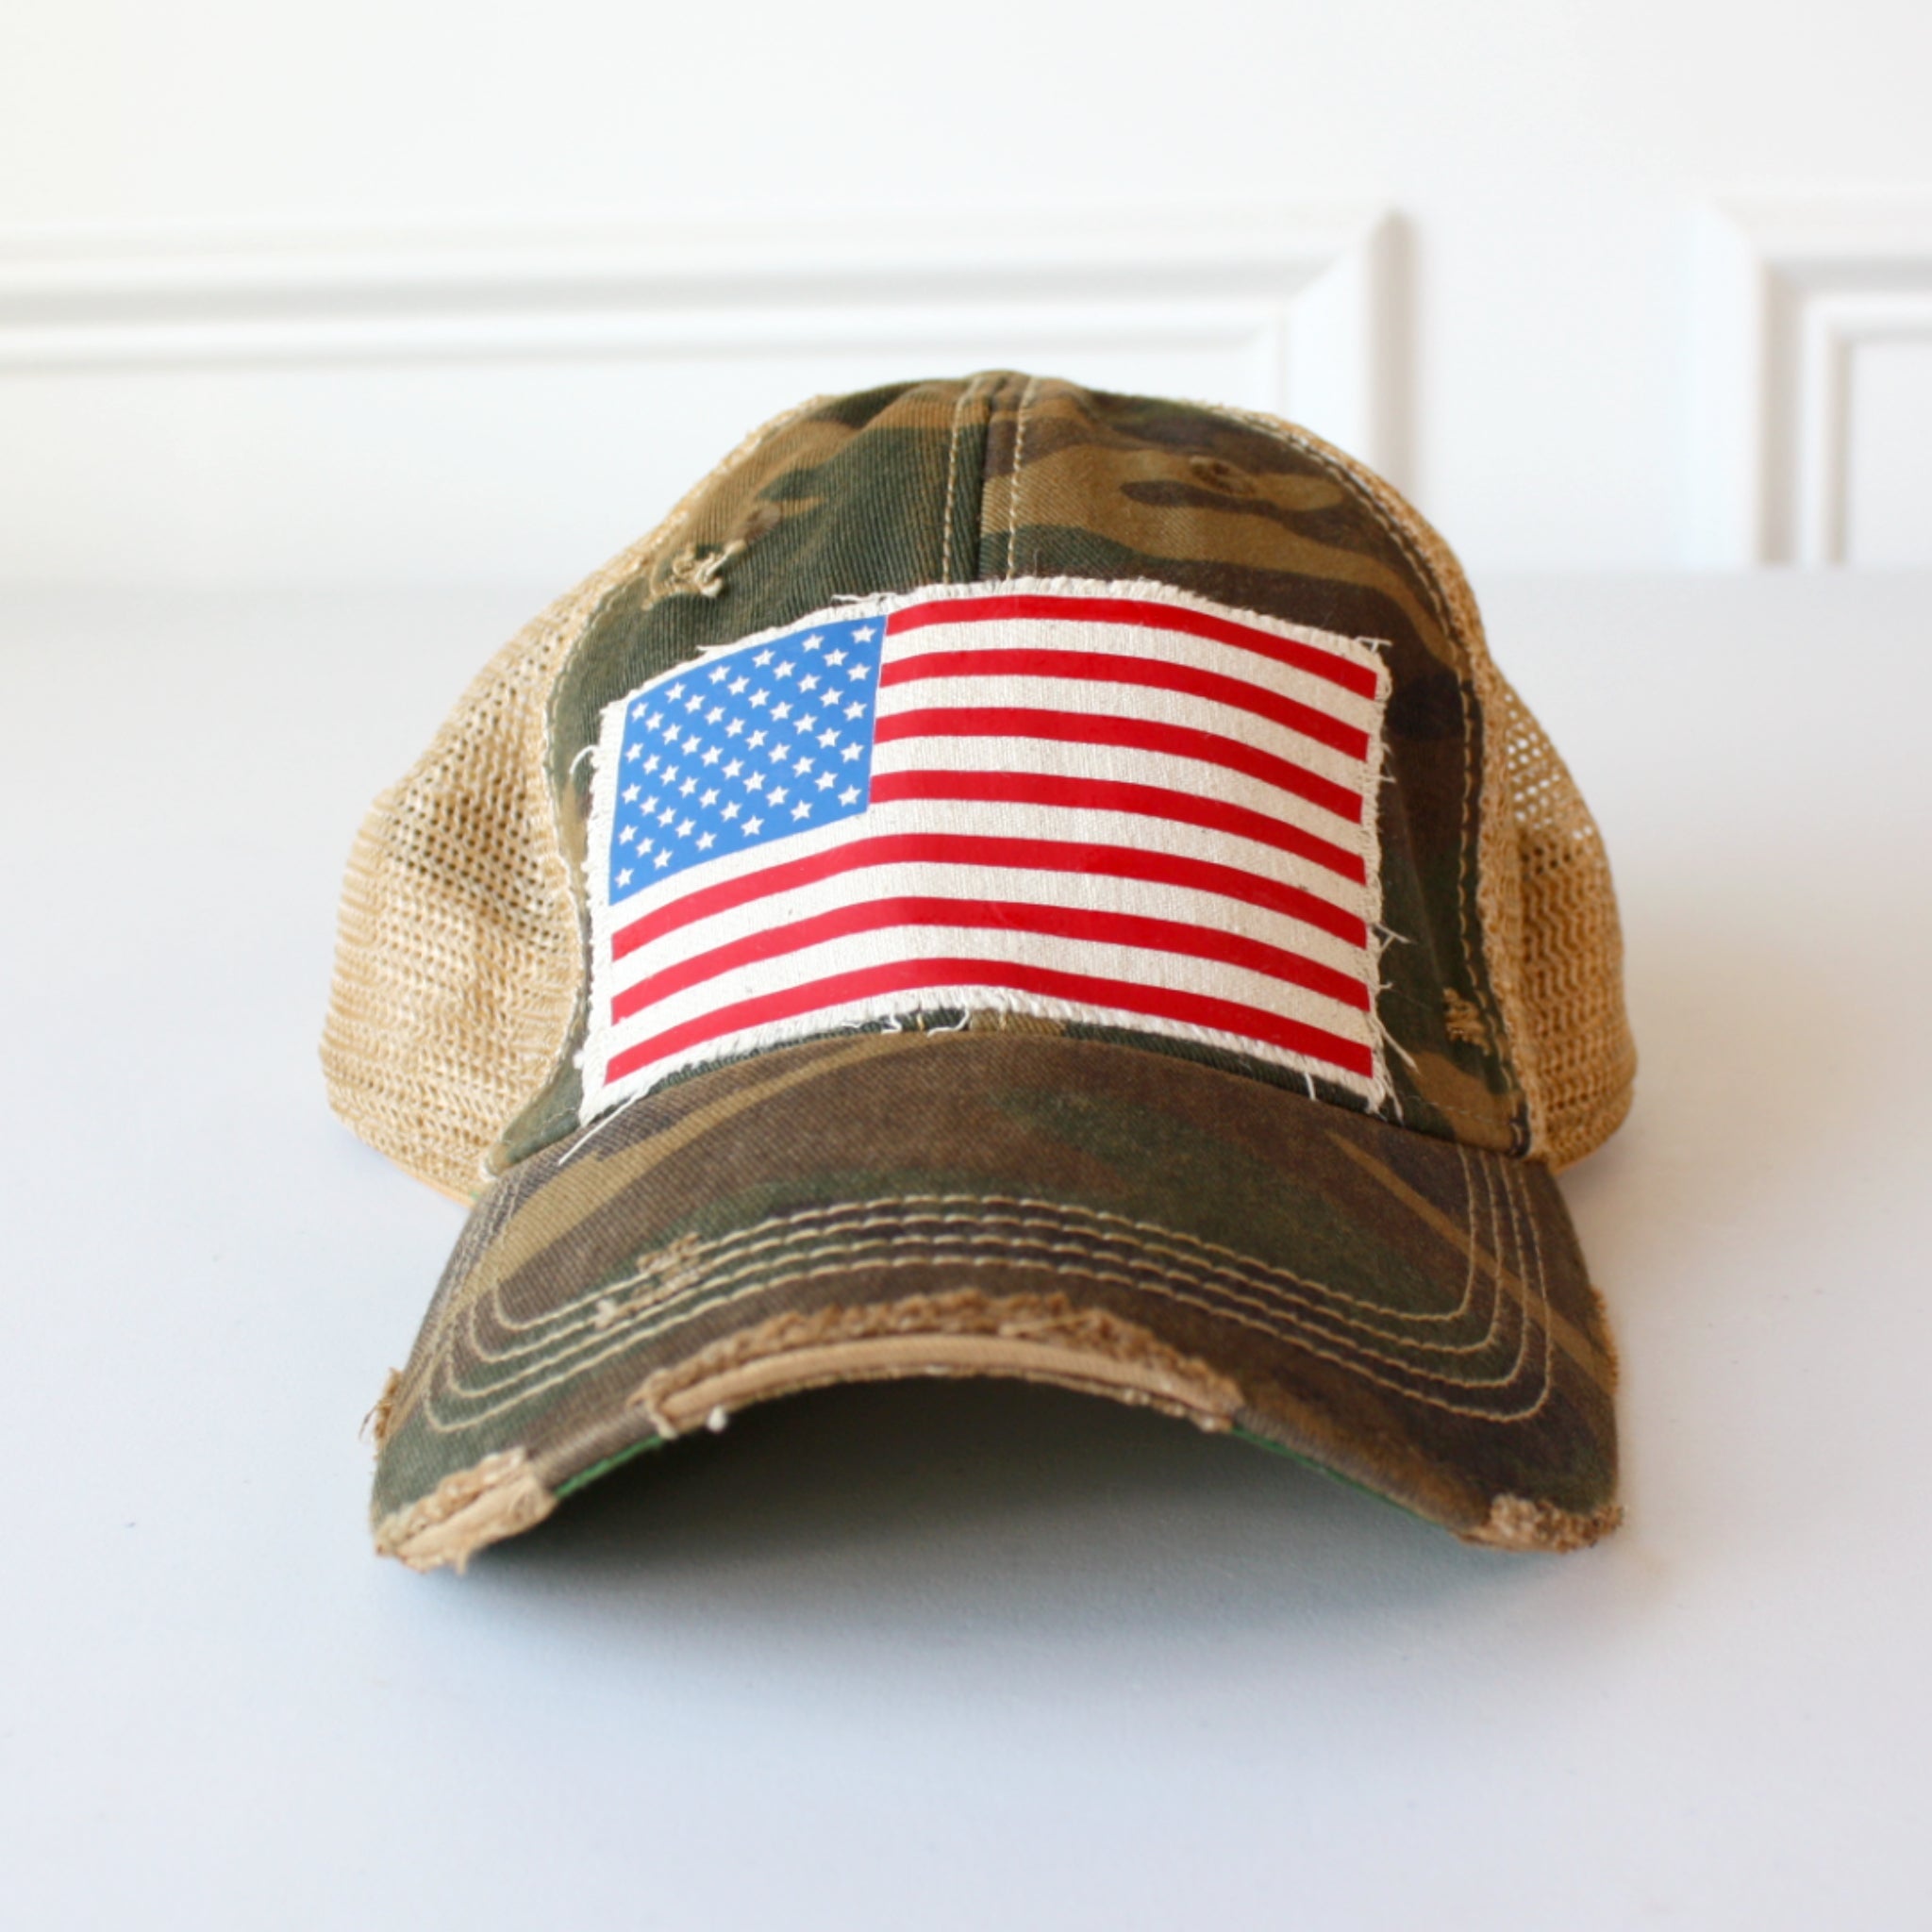 Distressed American Flag Hat - Camo - Proudly Made in The USA